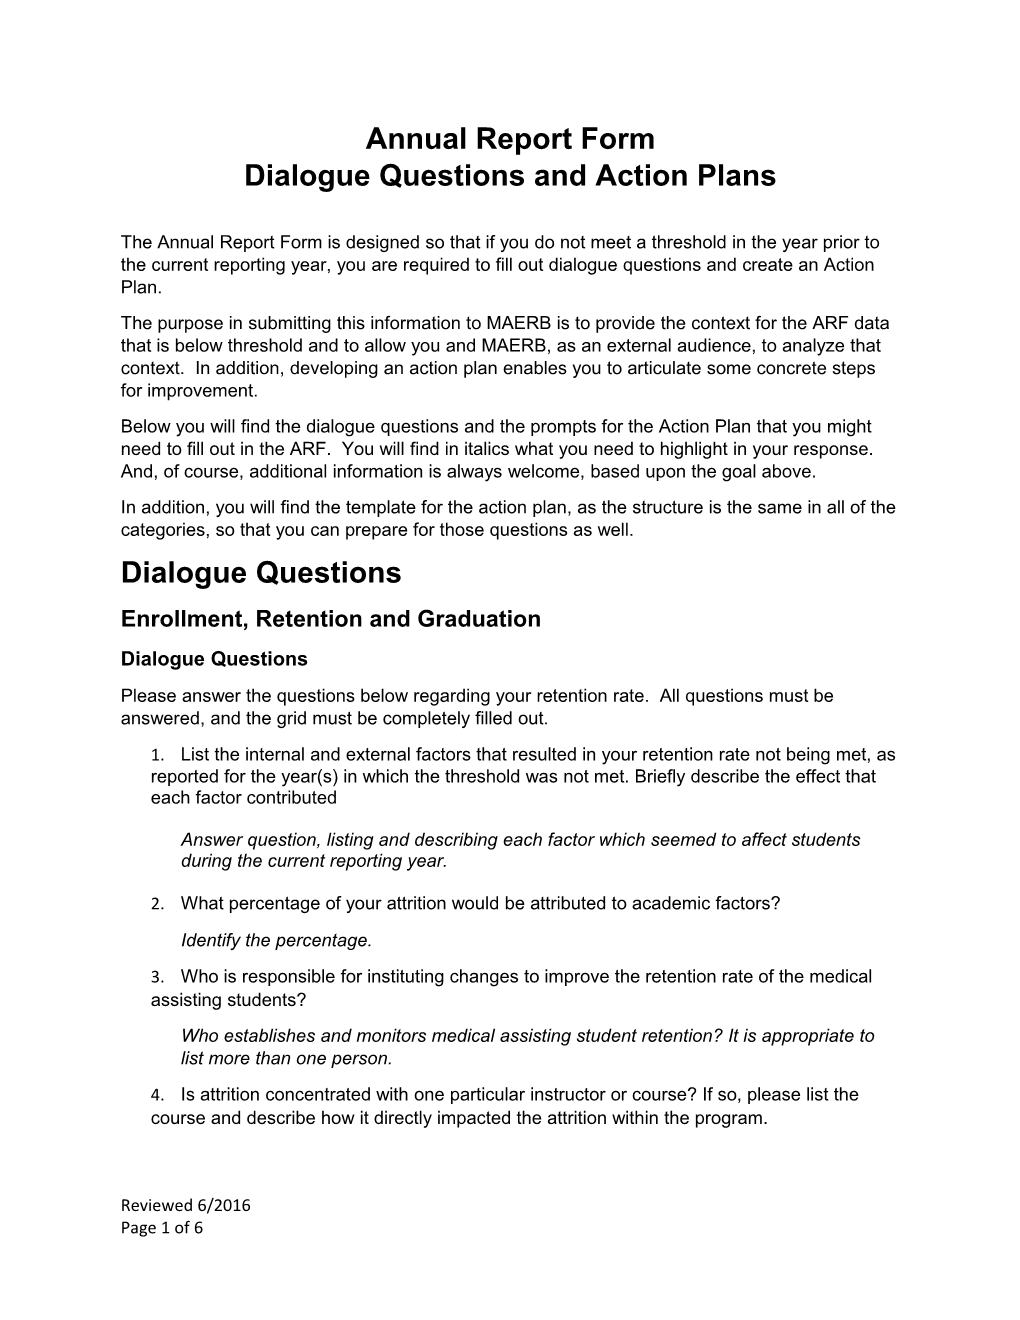 Dialogue Questions and Action Plans